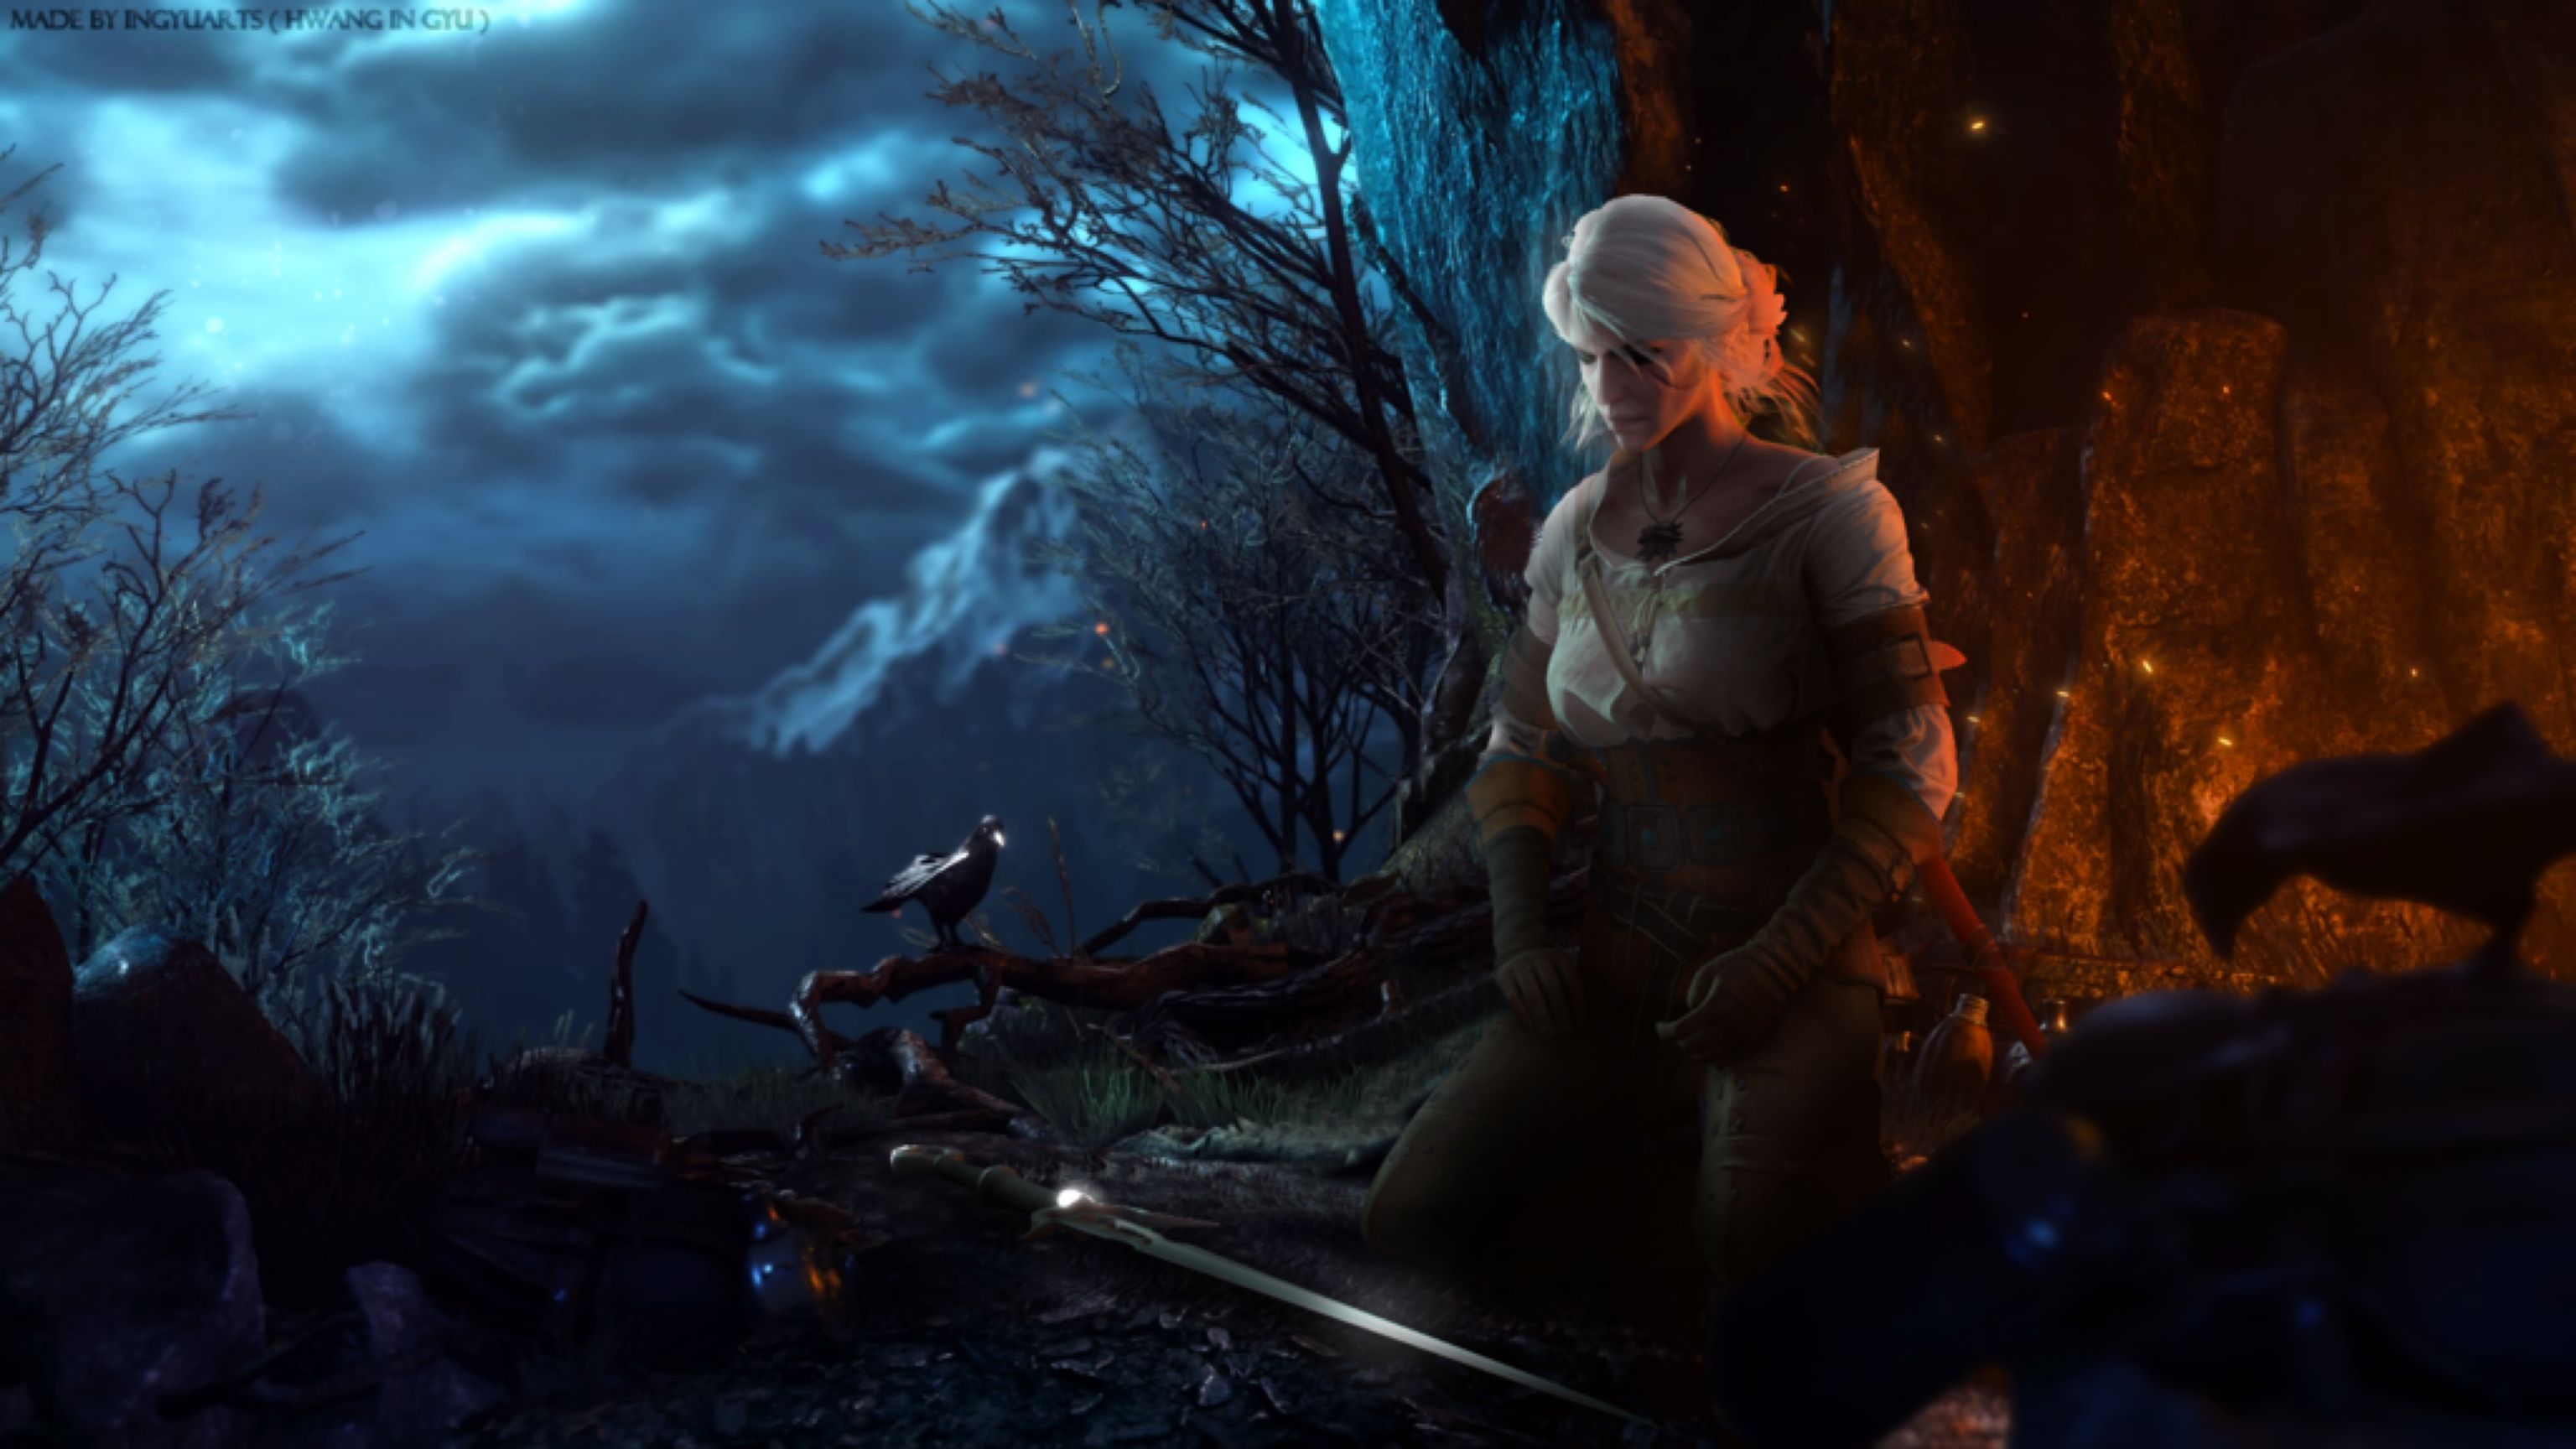 Ciri's Meditation. Gaming wallpaper, The witcher, The witcher game